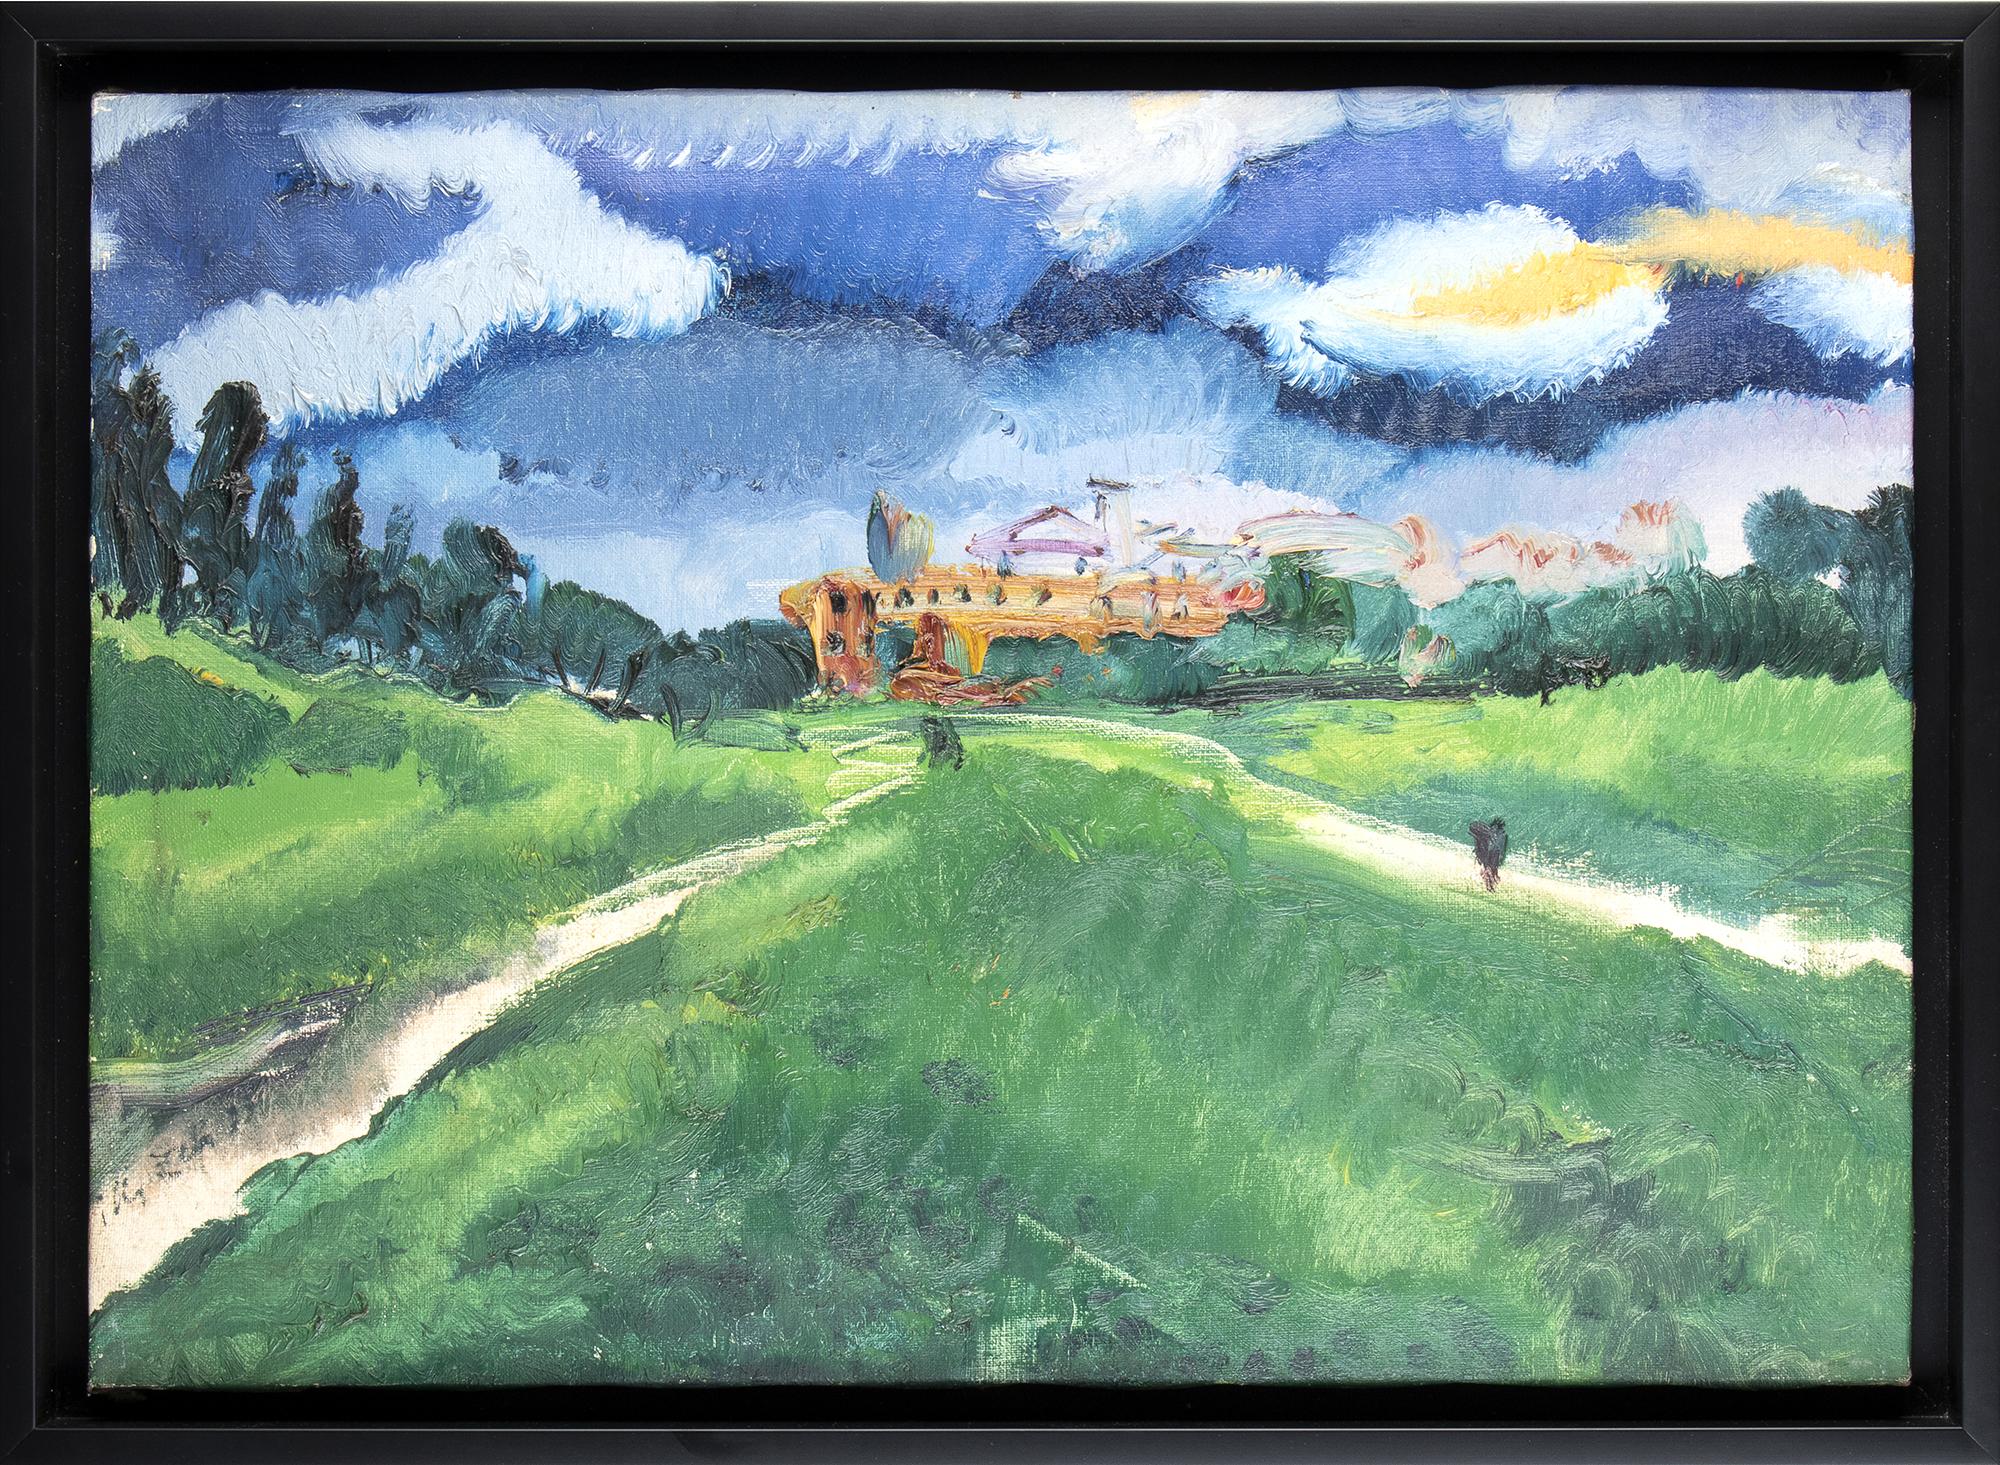 Ilir Zefi, landscape view of Circus Maximus in Rome signed and dated. Ilir Zefi was born in 1963 in Albania in Mirdite and studied at the Academy of Fine Arts in Tirana, then began exhibiting in various group exhibitions here since the end of the